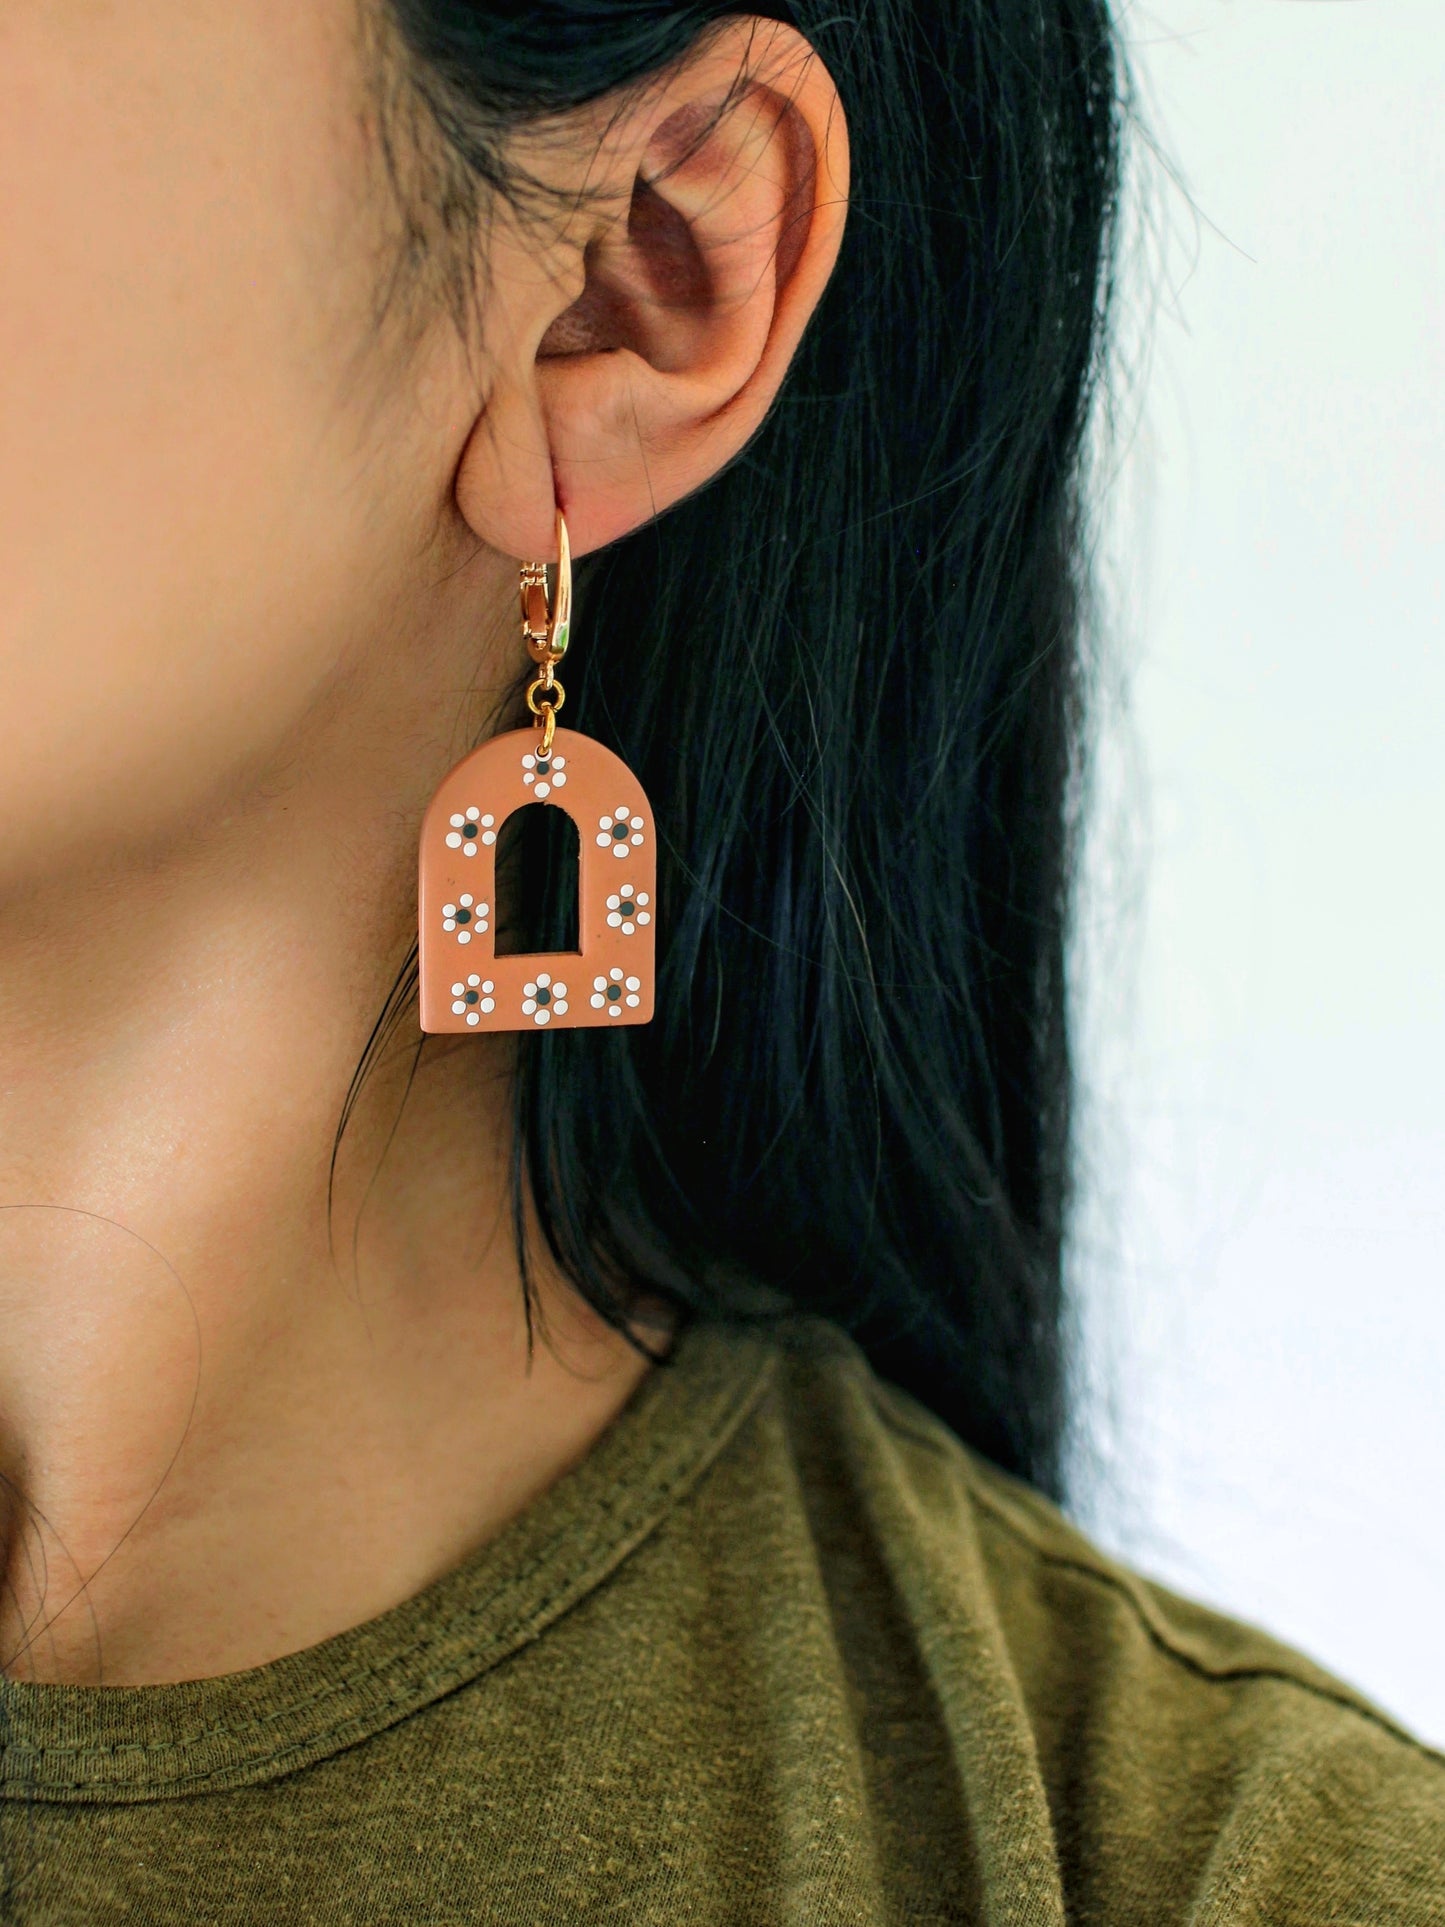 Anemone Arches - Mexican Terracotta (Barro) inspired Earrings